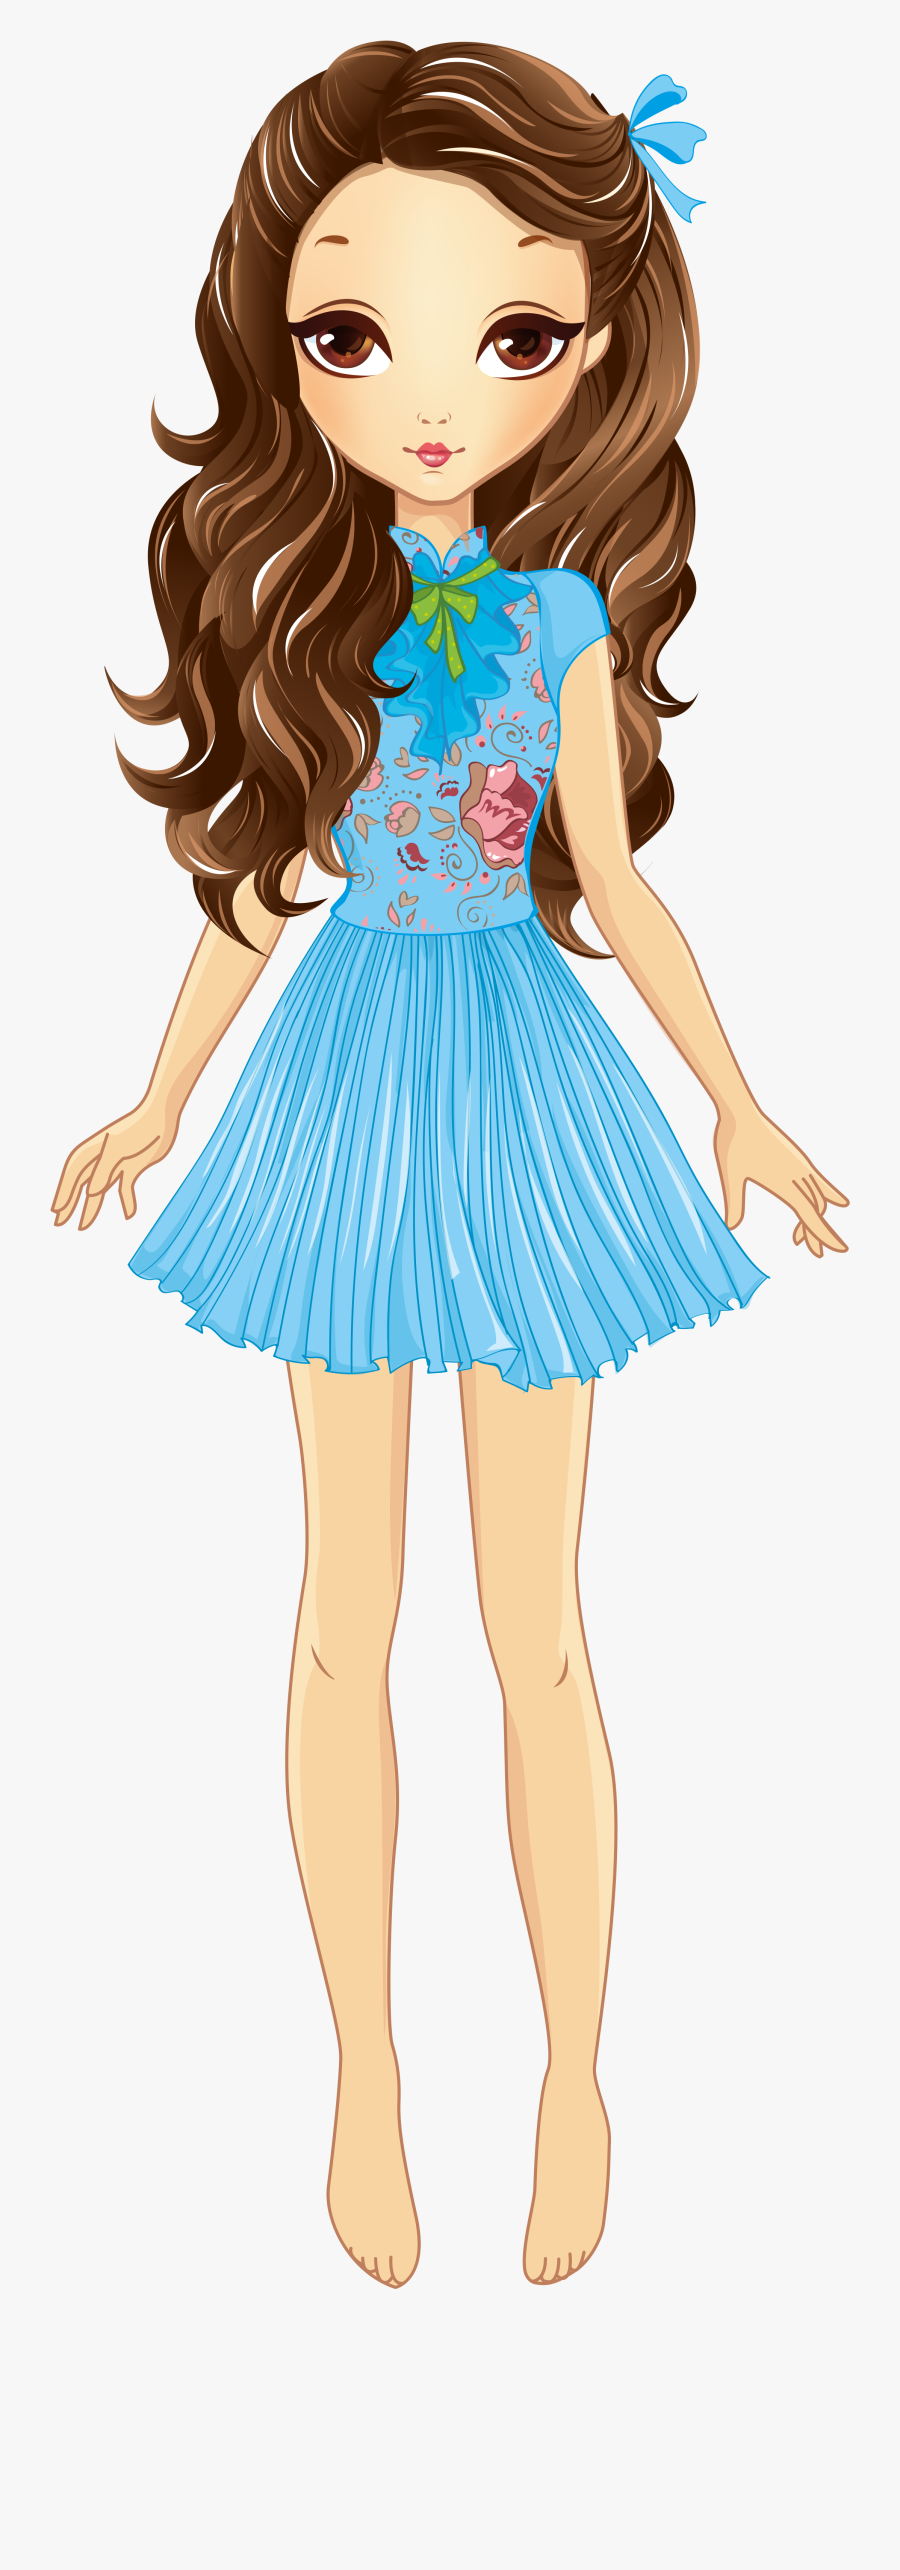 Png Transparent Download Beautiful Fashion With White - Beauty Fashion Girl Clipart, Transparent Clipart